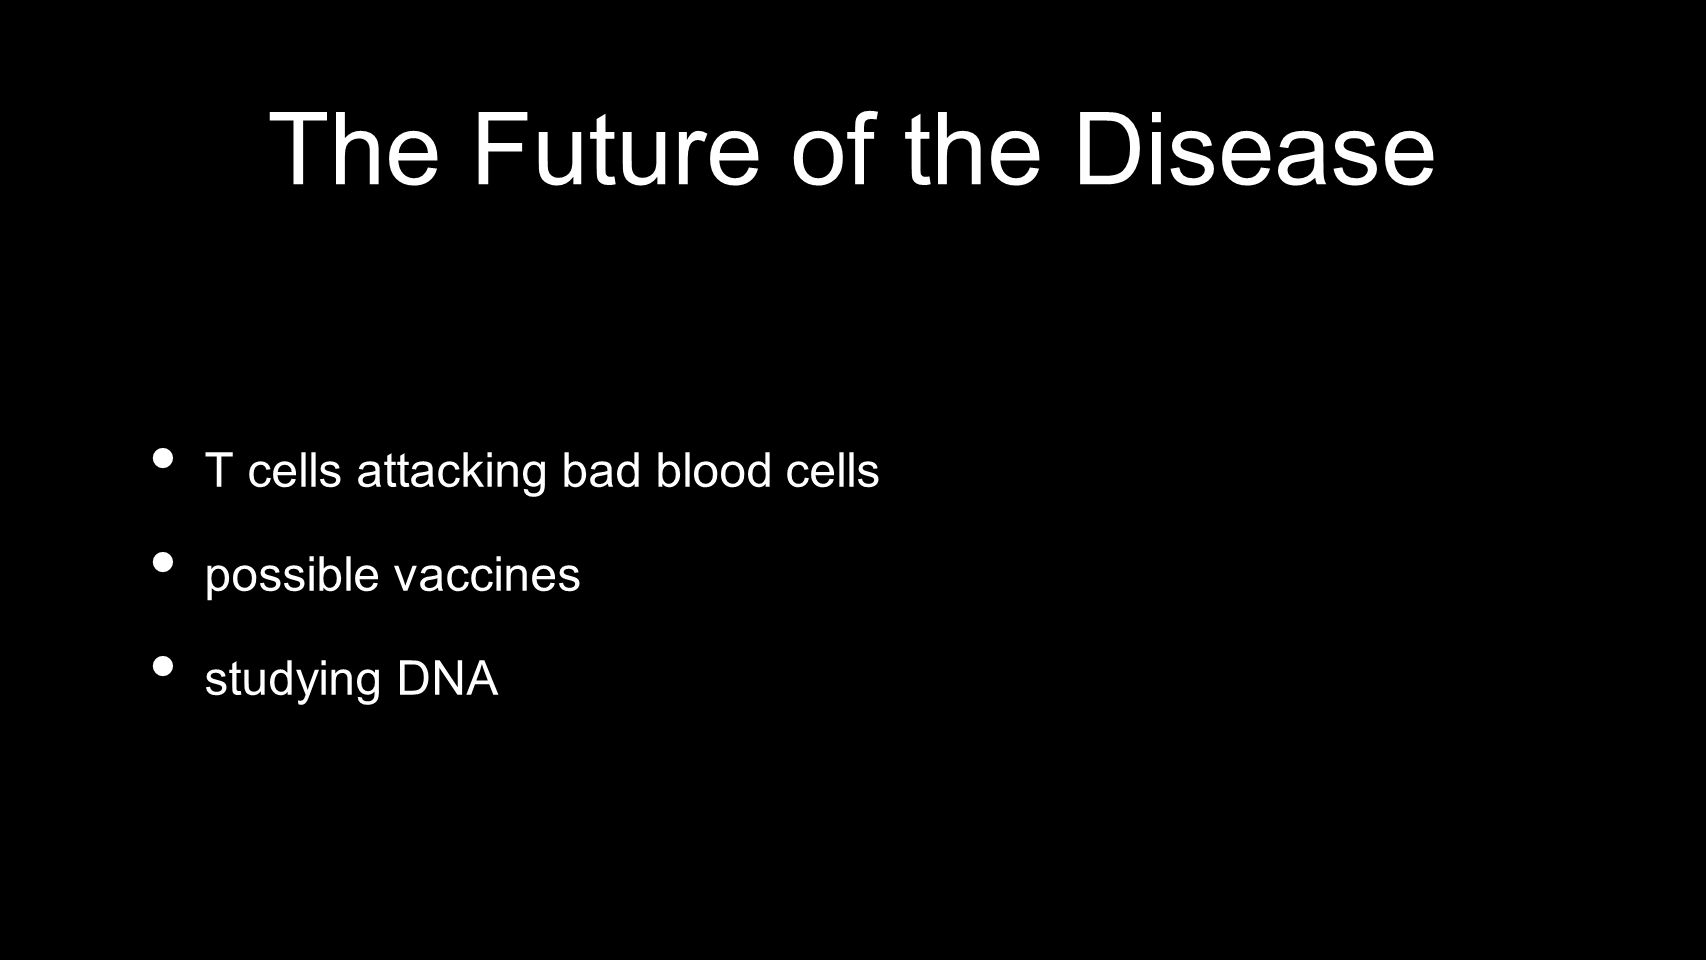 The Future of the Disease